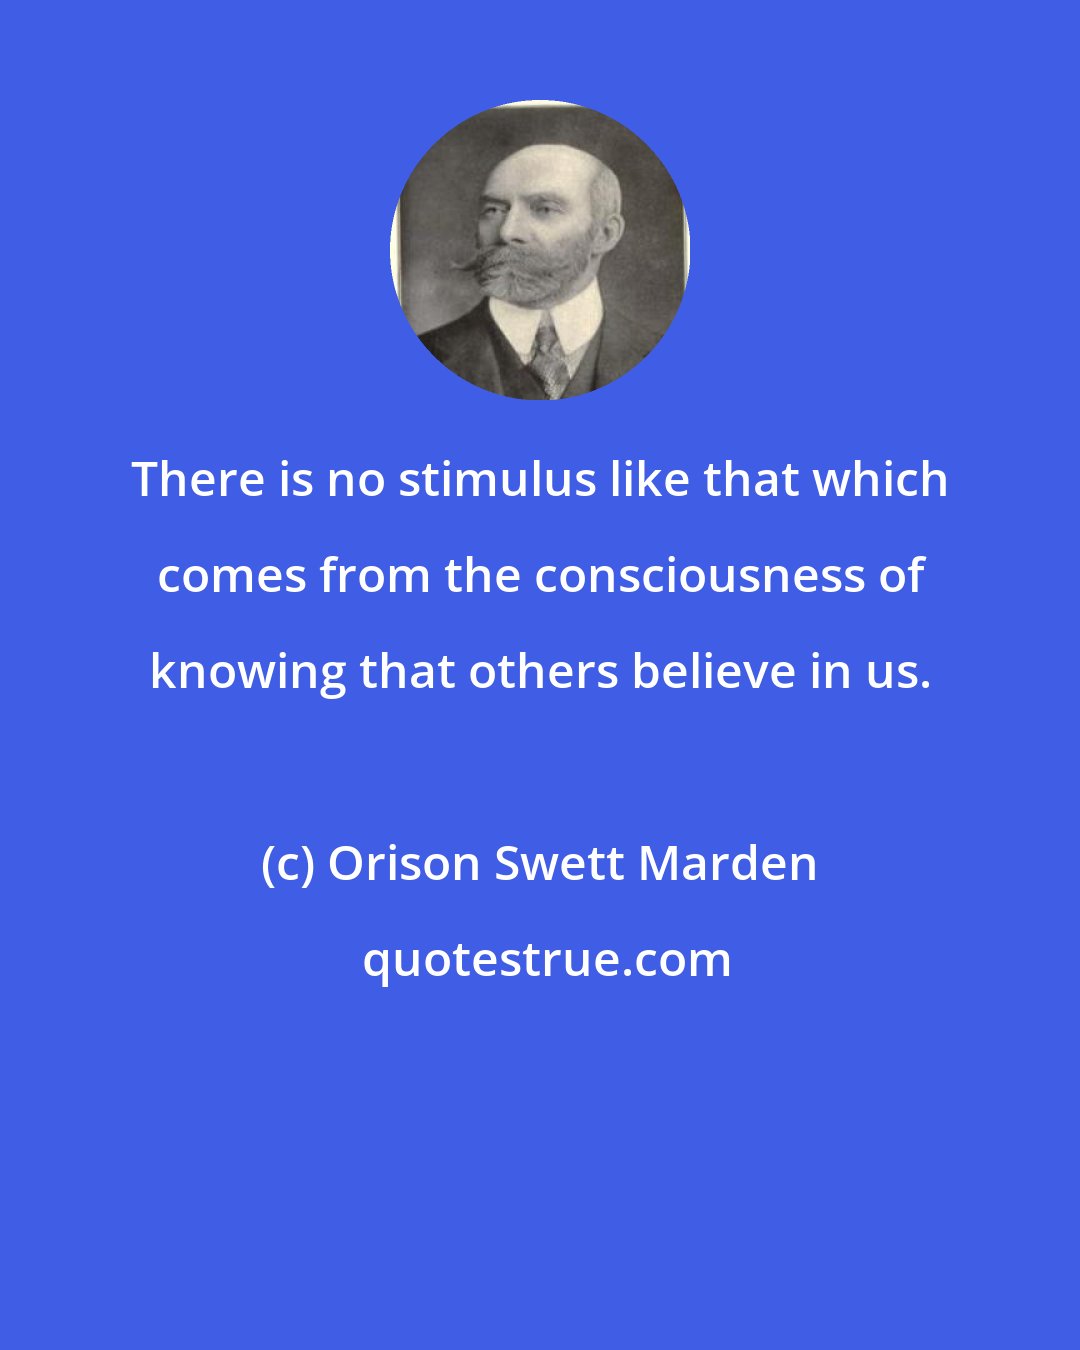 Orison Swett Marden: There is no stimulus like that which comes from the consciousness of knowing that others believe in us.